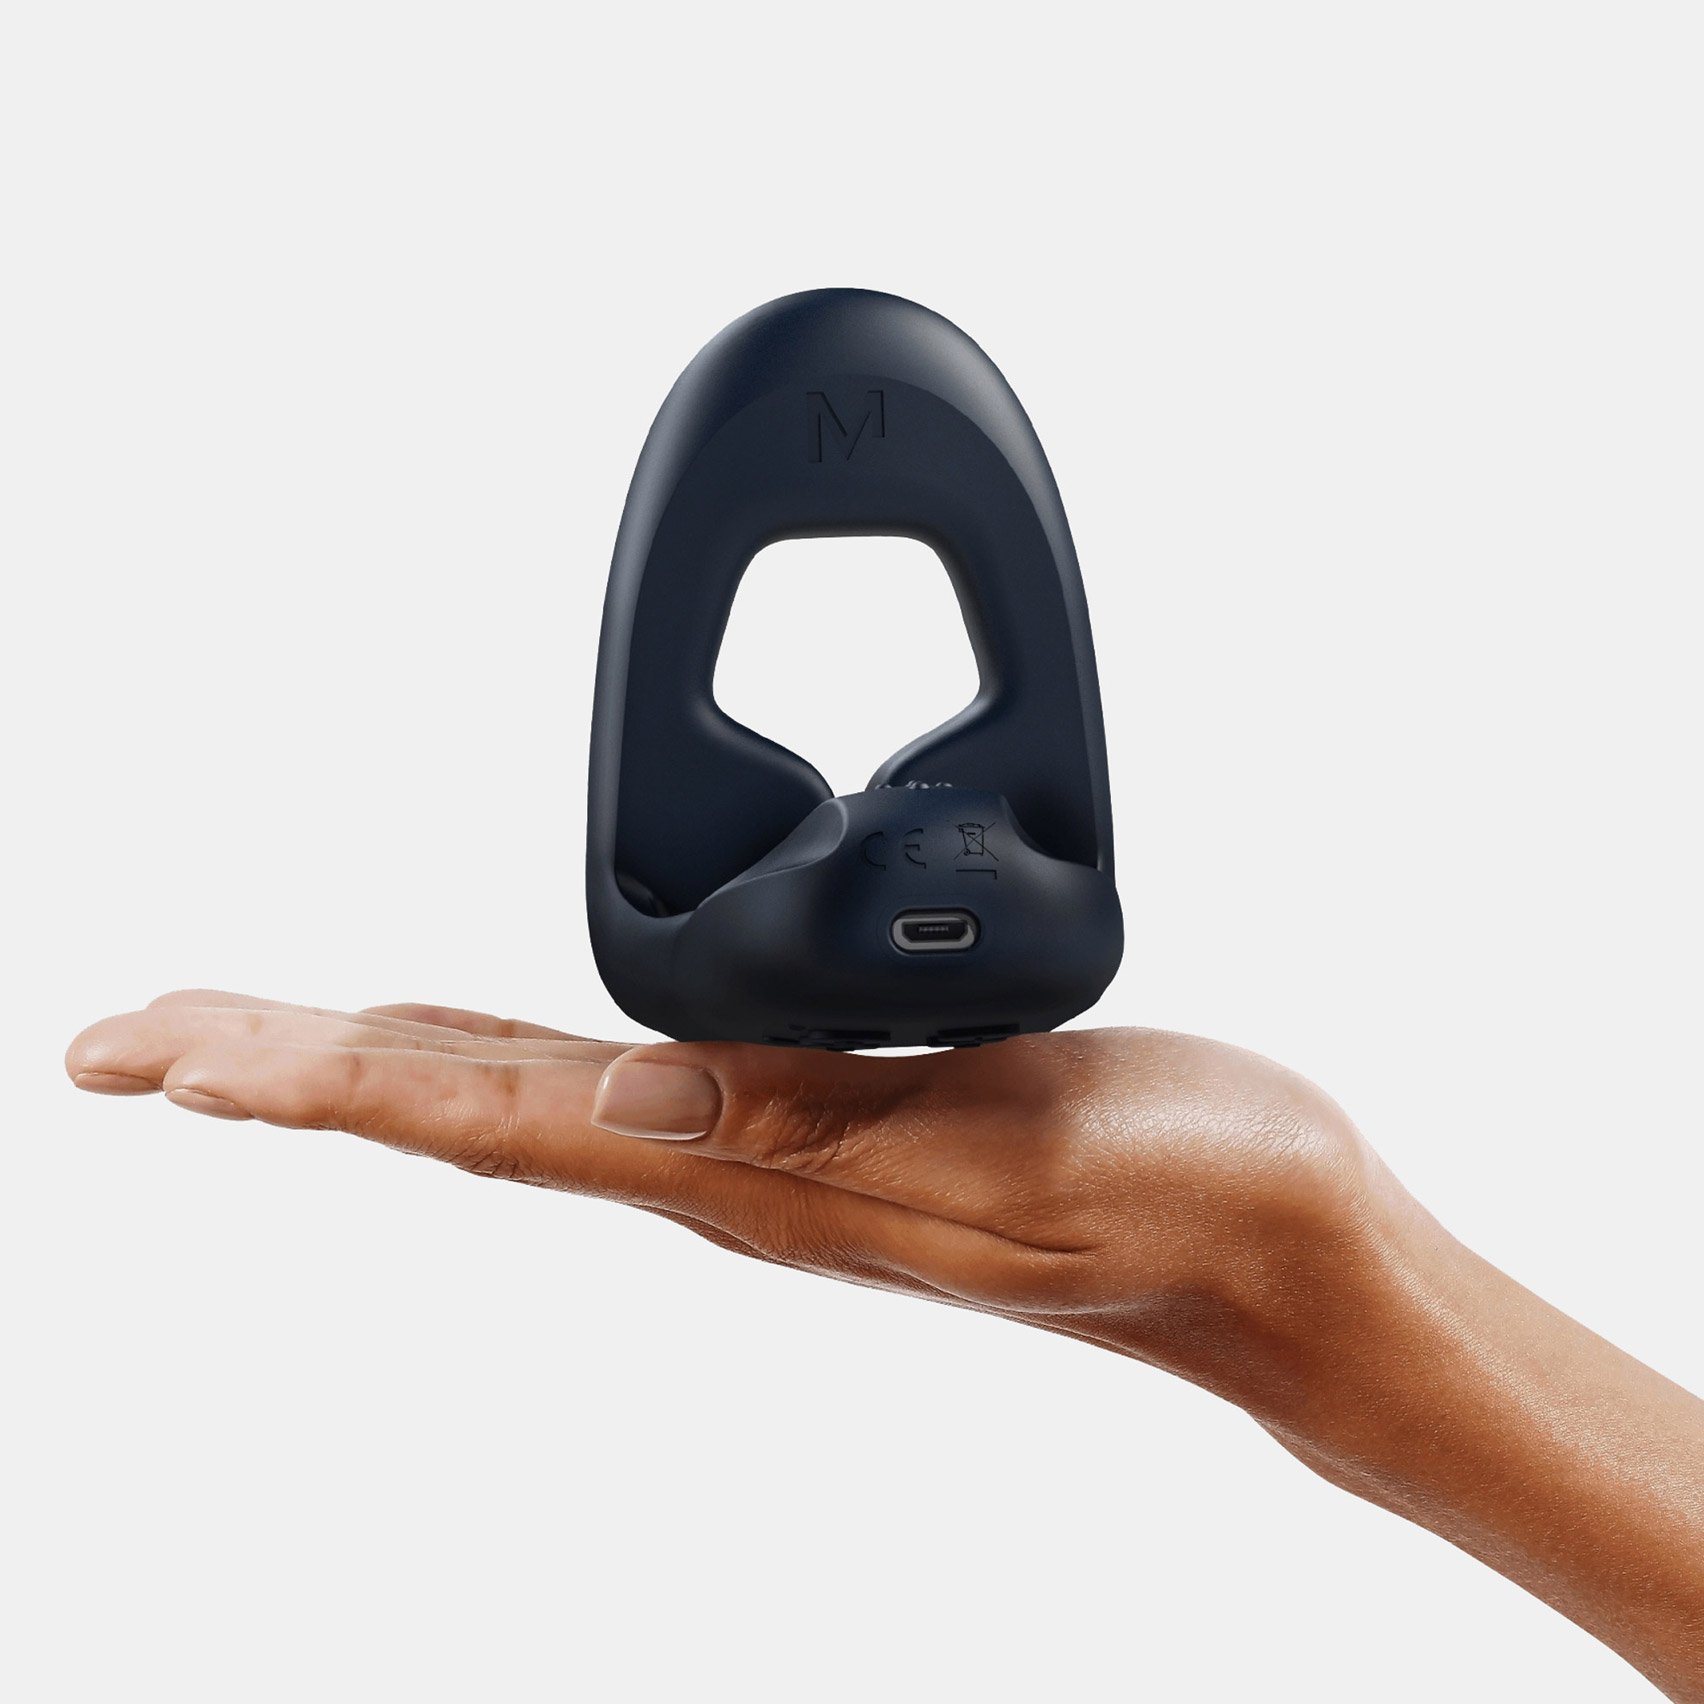 Tenuto 2 is a wearable vibrator designed to tackle erectile dysfunction photo image